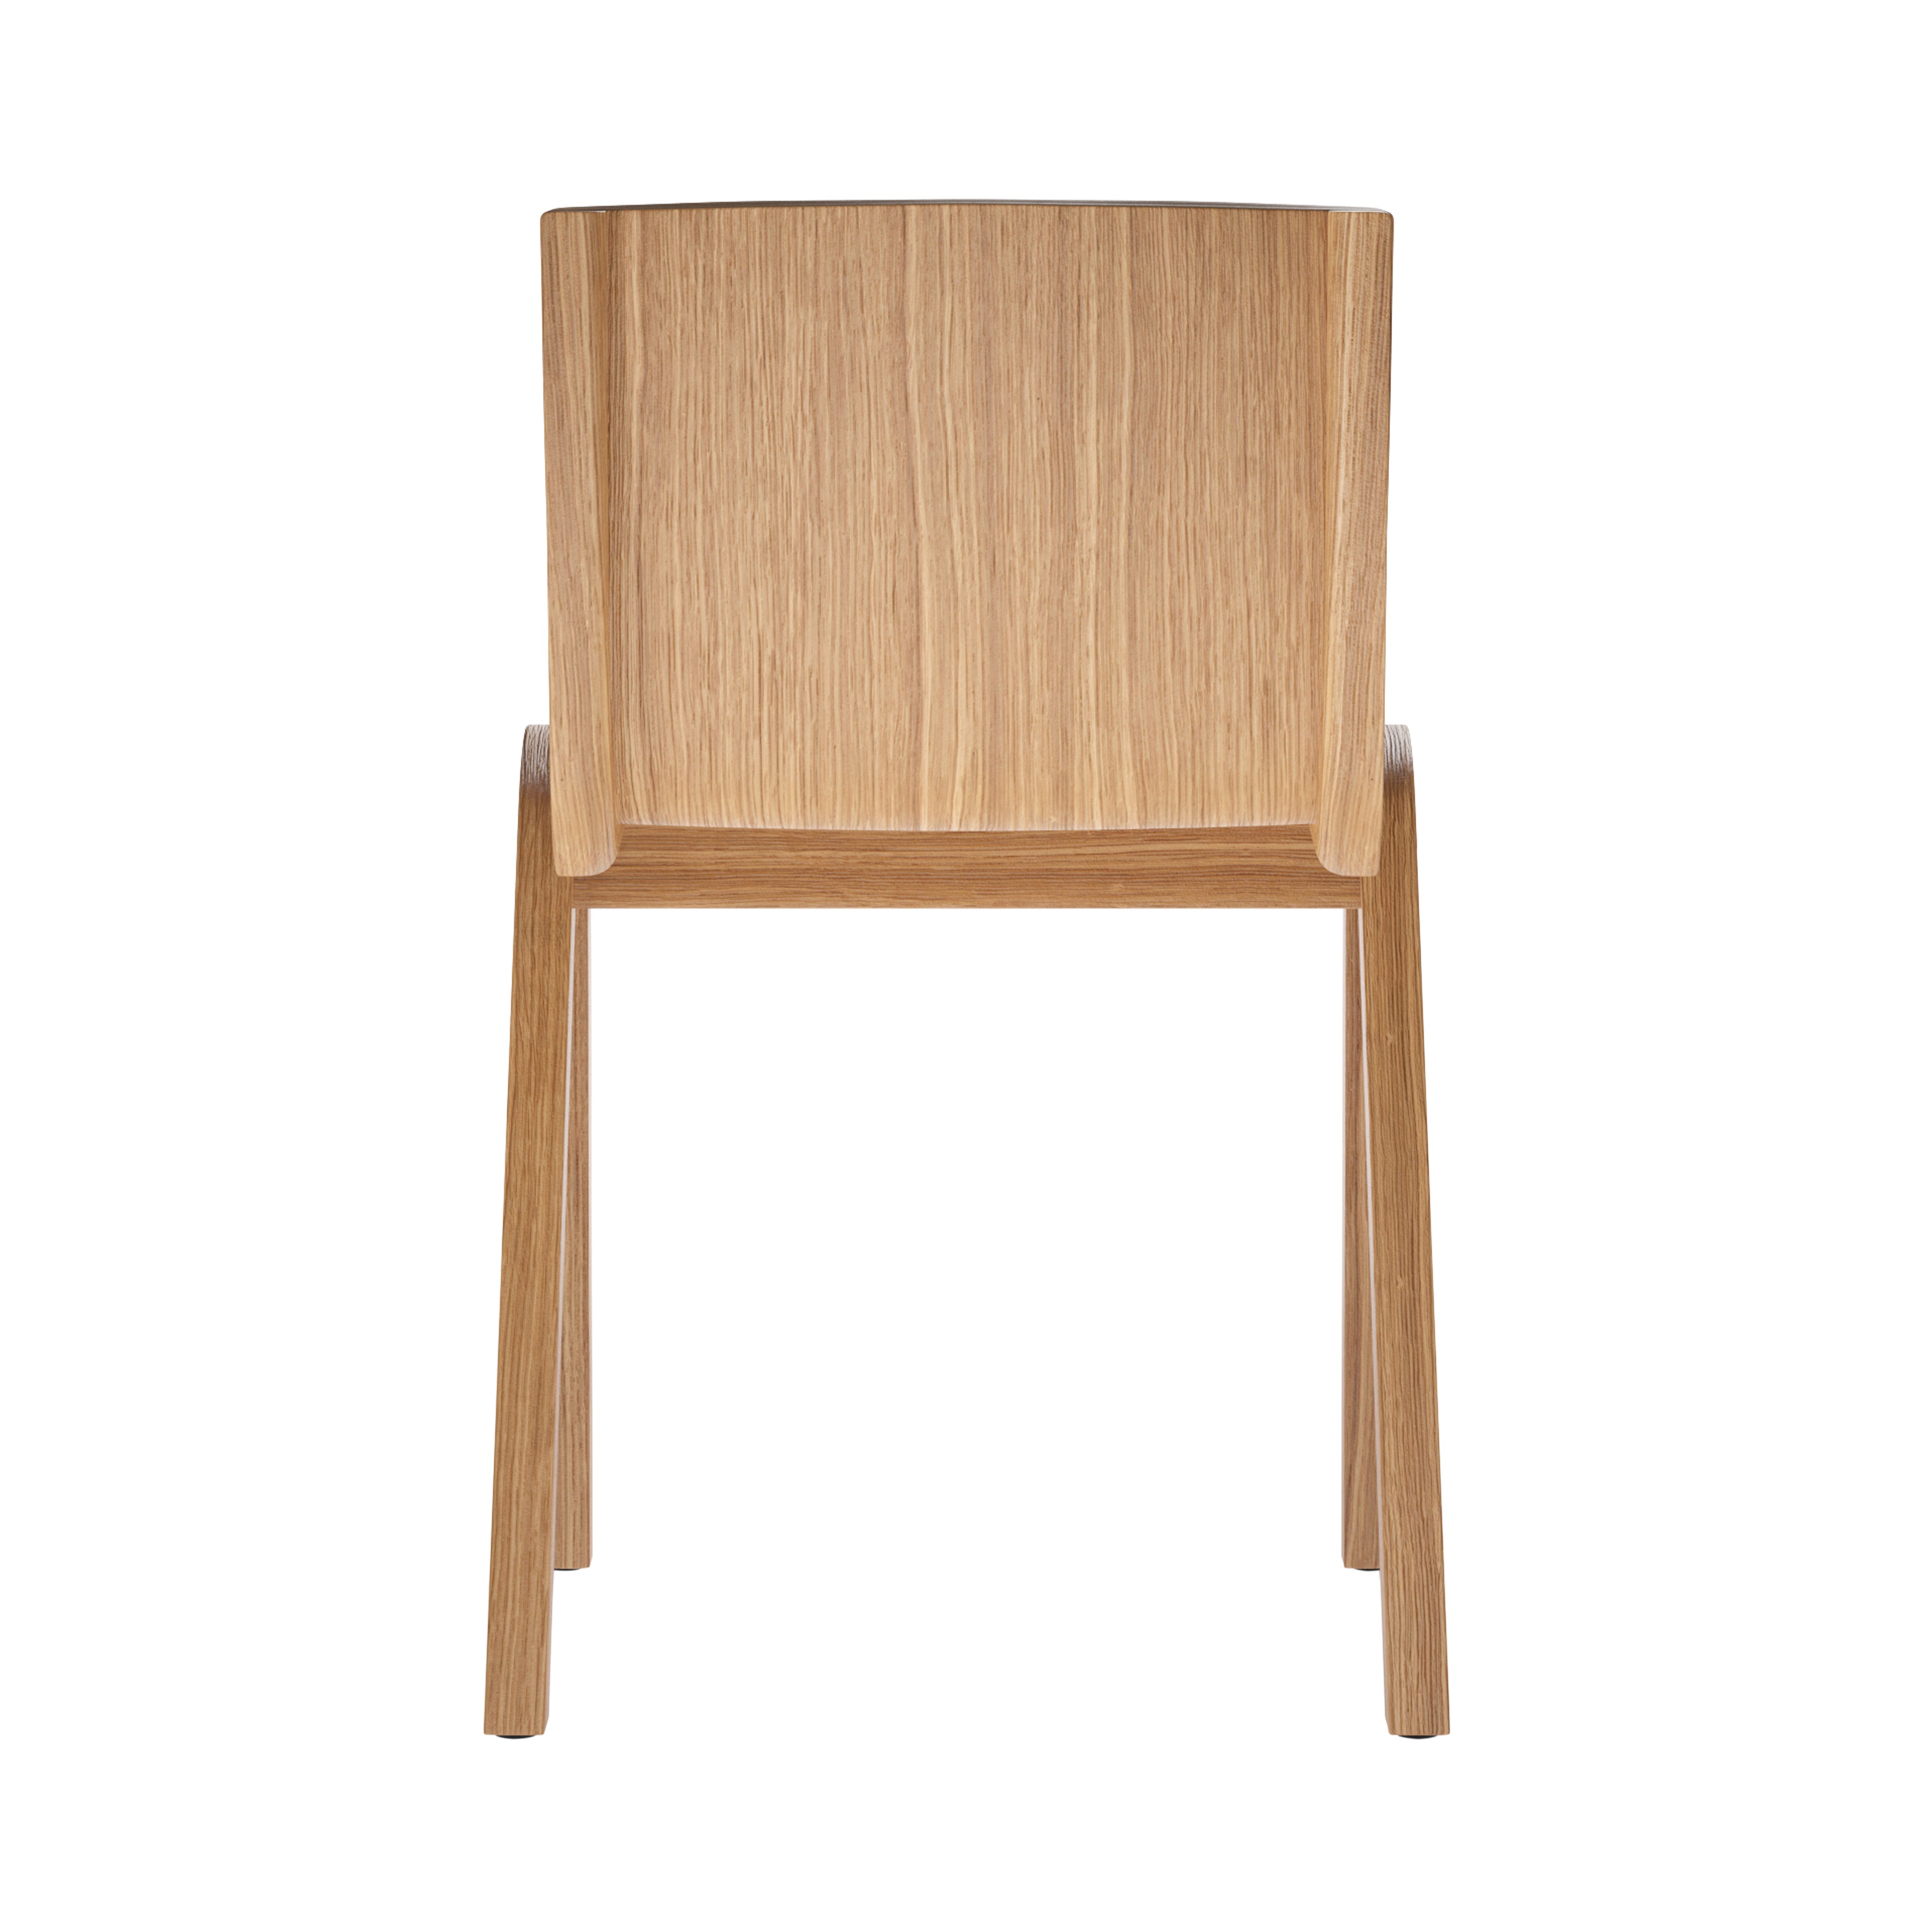 Ready Dining Chair: Stacking + Natural Oak